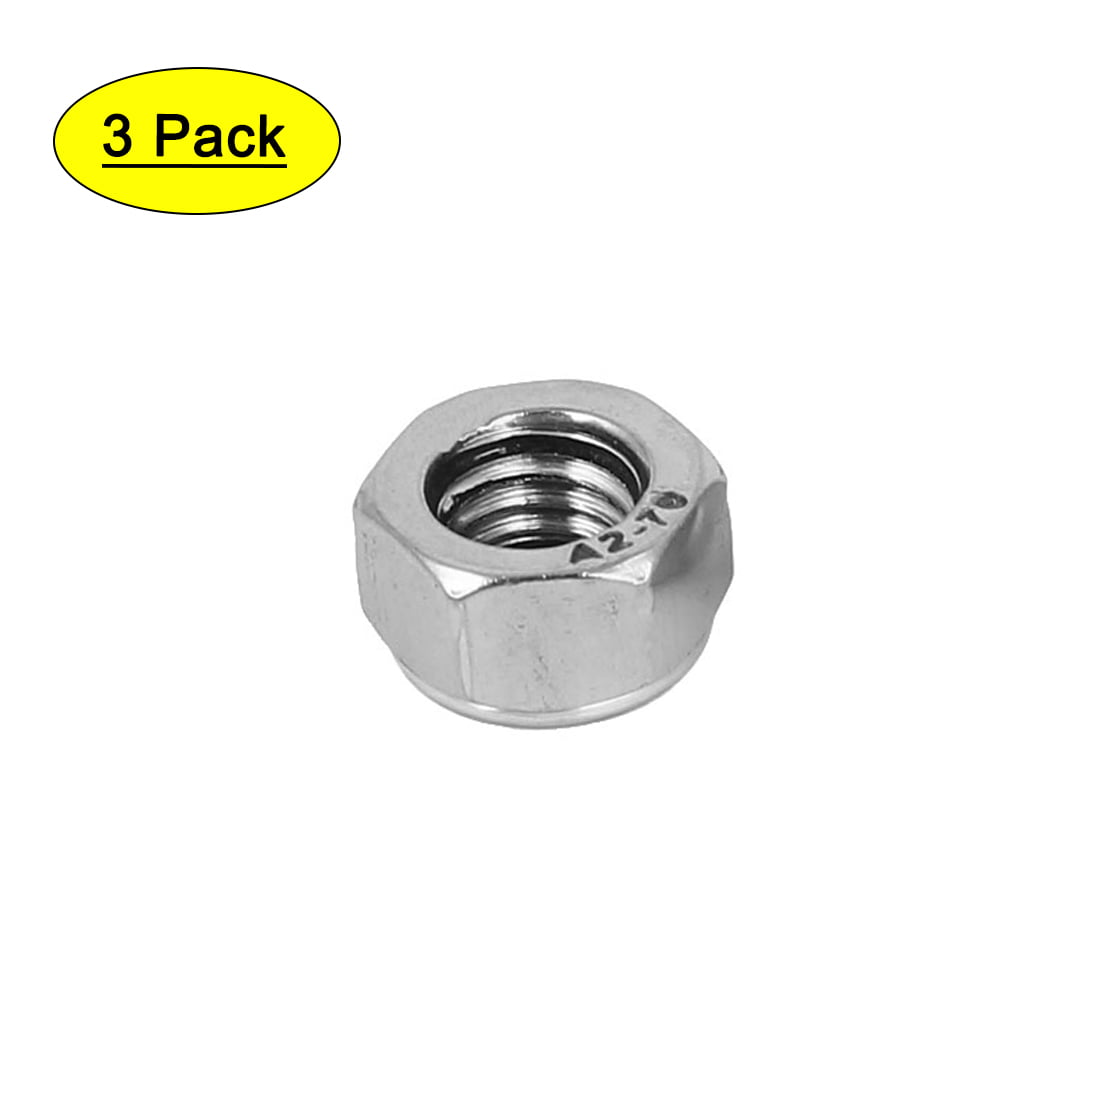 A2 Stainless M8-M20 Fine Pitch Thread Hex Nyloc Nylon Insert Self-Locking Nuts 